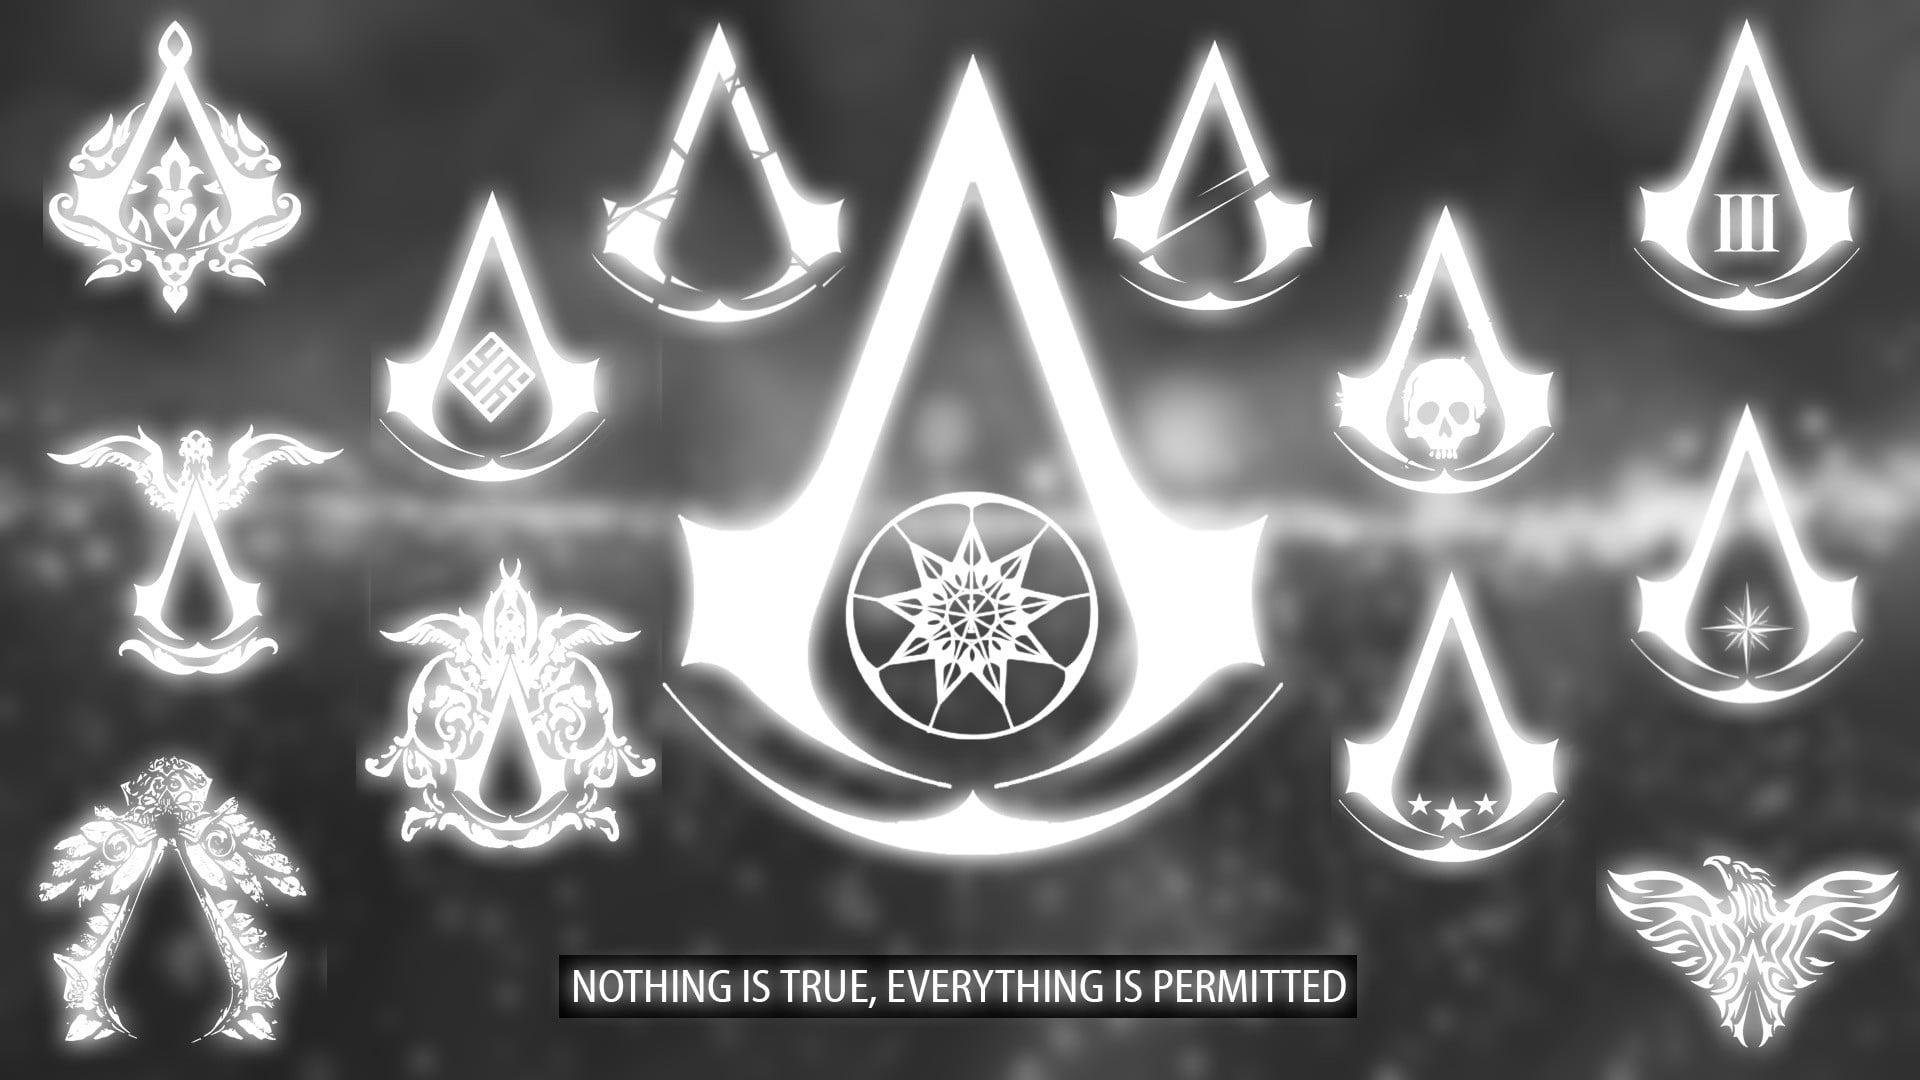 Photo of Assassin's Creed logo with nothing is true, everything is